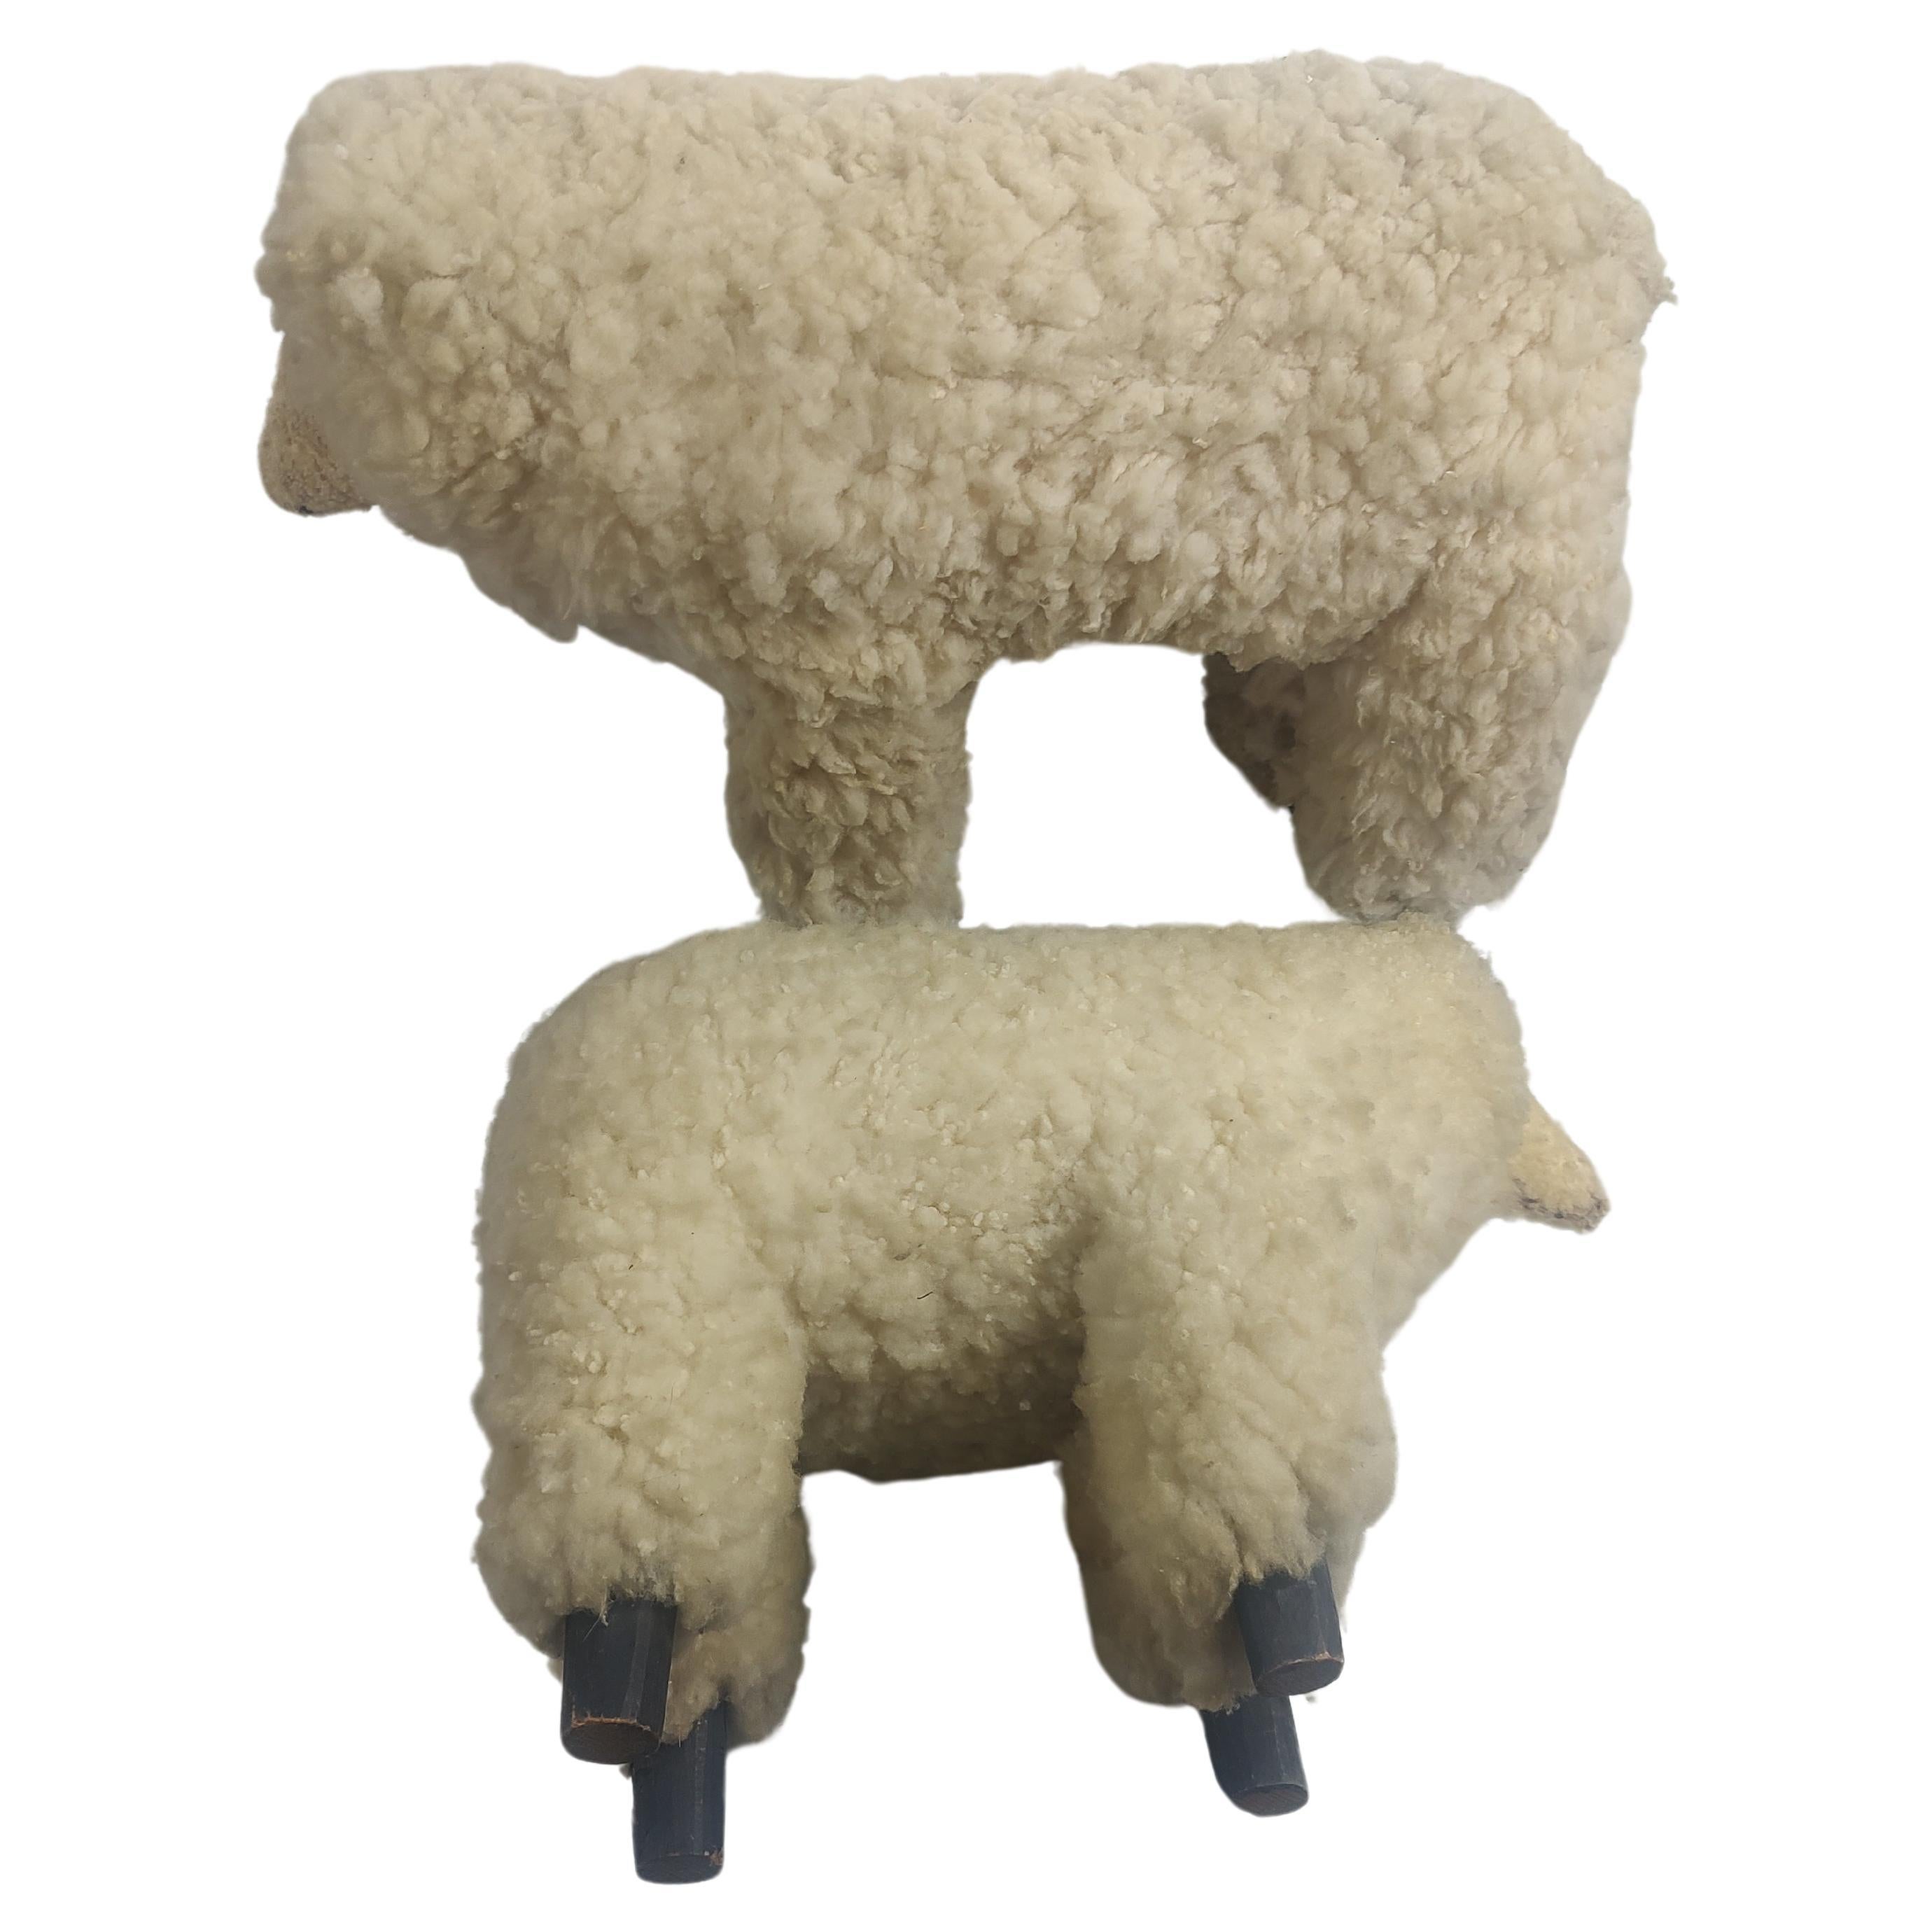 Fabulous pair of late 20th Century sculptures of real sheep. Both are covered in wool except for the wooden hooves. In excellent vintage condition with minimal wear. Priced and sold as a pair. Smaller sheep is 17.5 w x 8d x 13h
Larger sheep is 23.5w